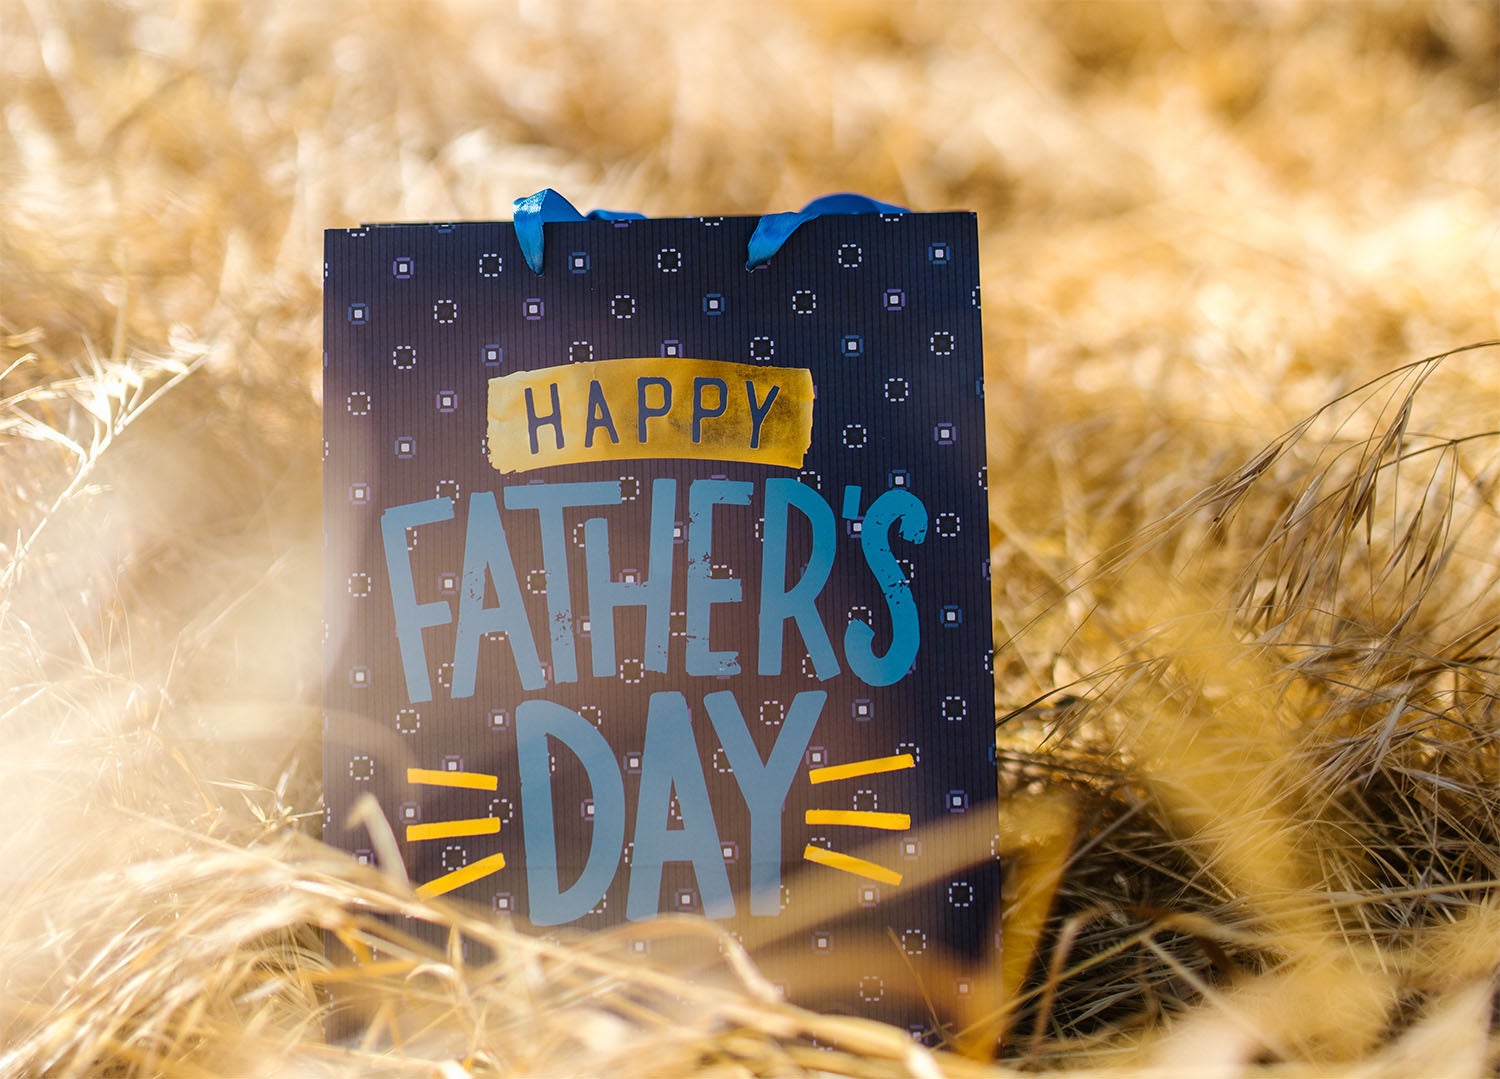 Father's day gifts for in & around the home | RE/MAX™ of Southern Africa